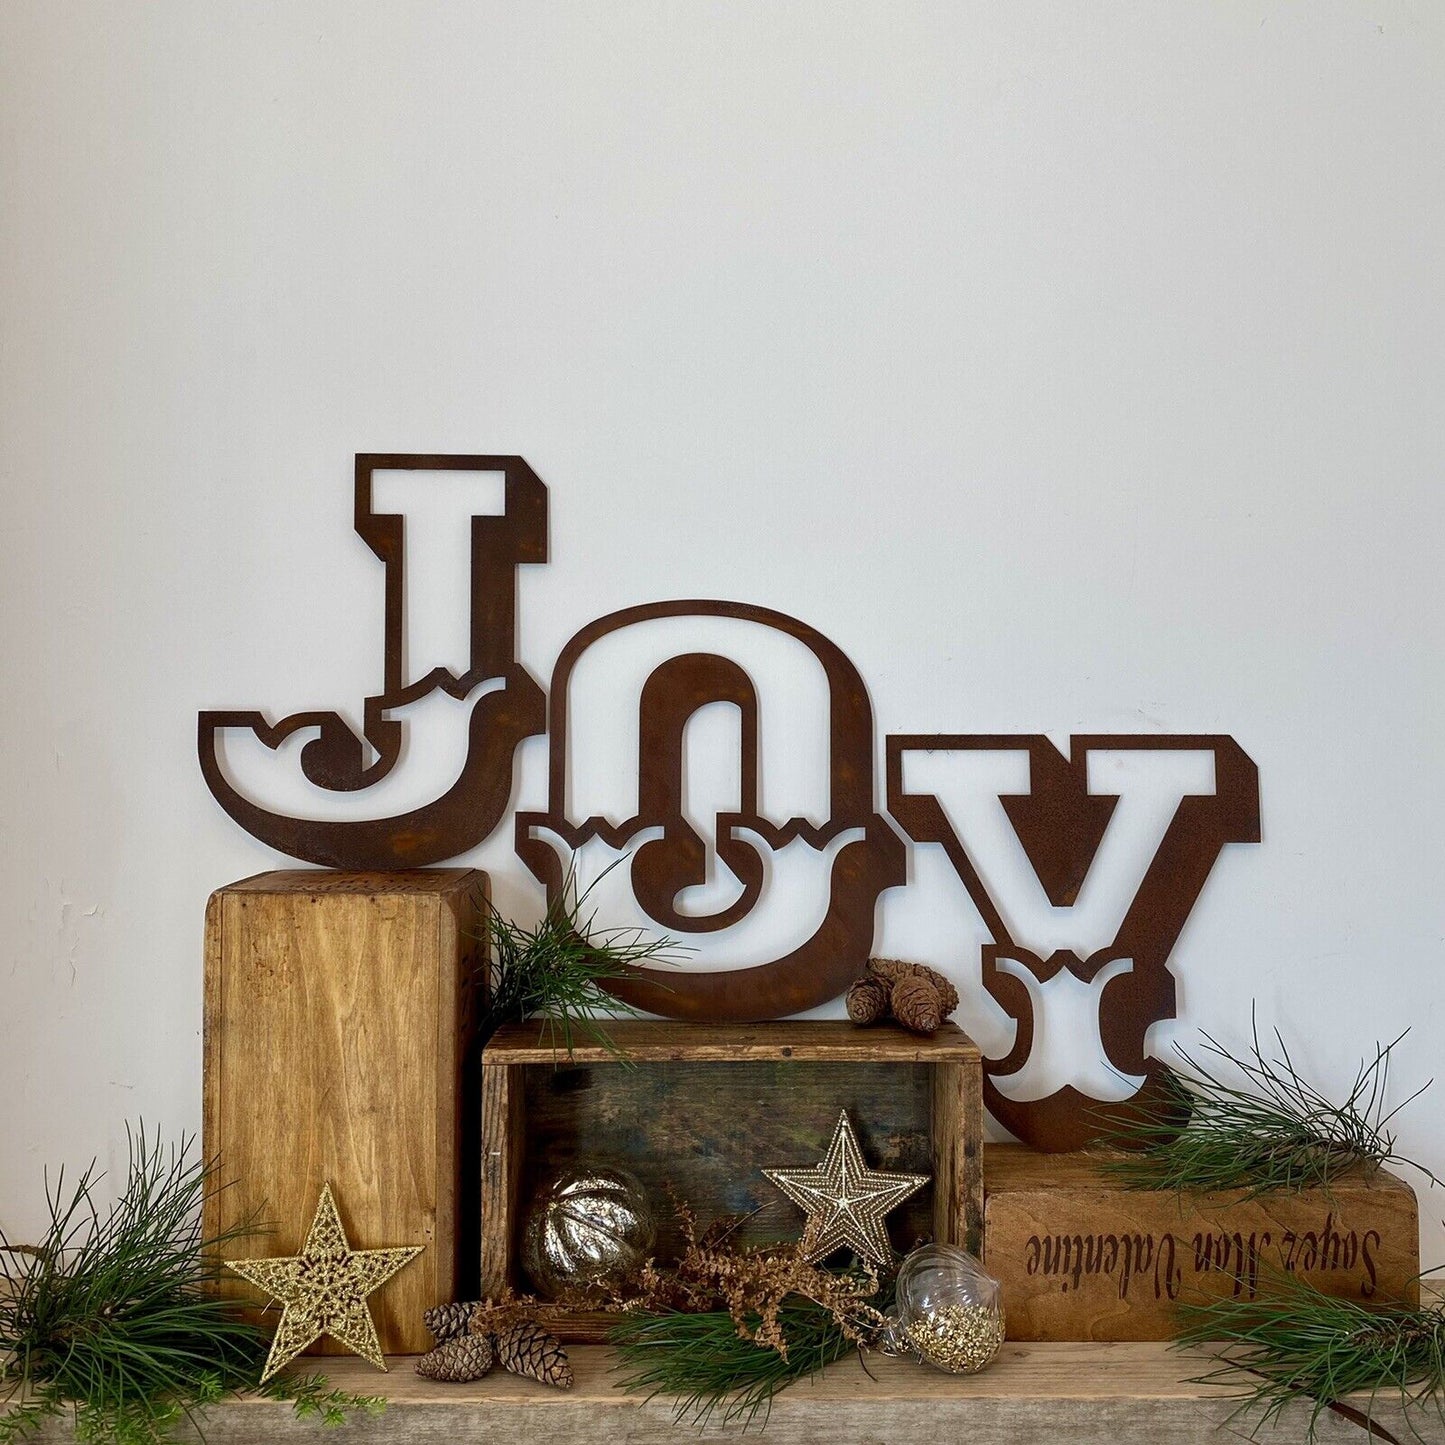 Christmas Mantle Fireplace Decoration JOY In Rustic Rusted Carnival Letters 12 Inches Tall.